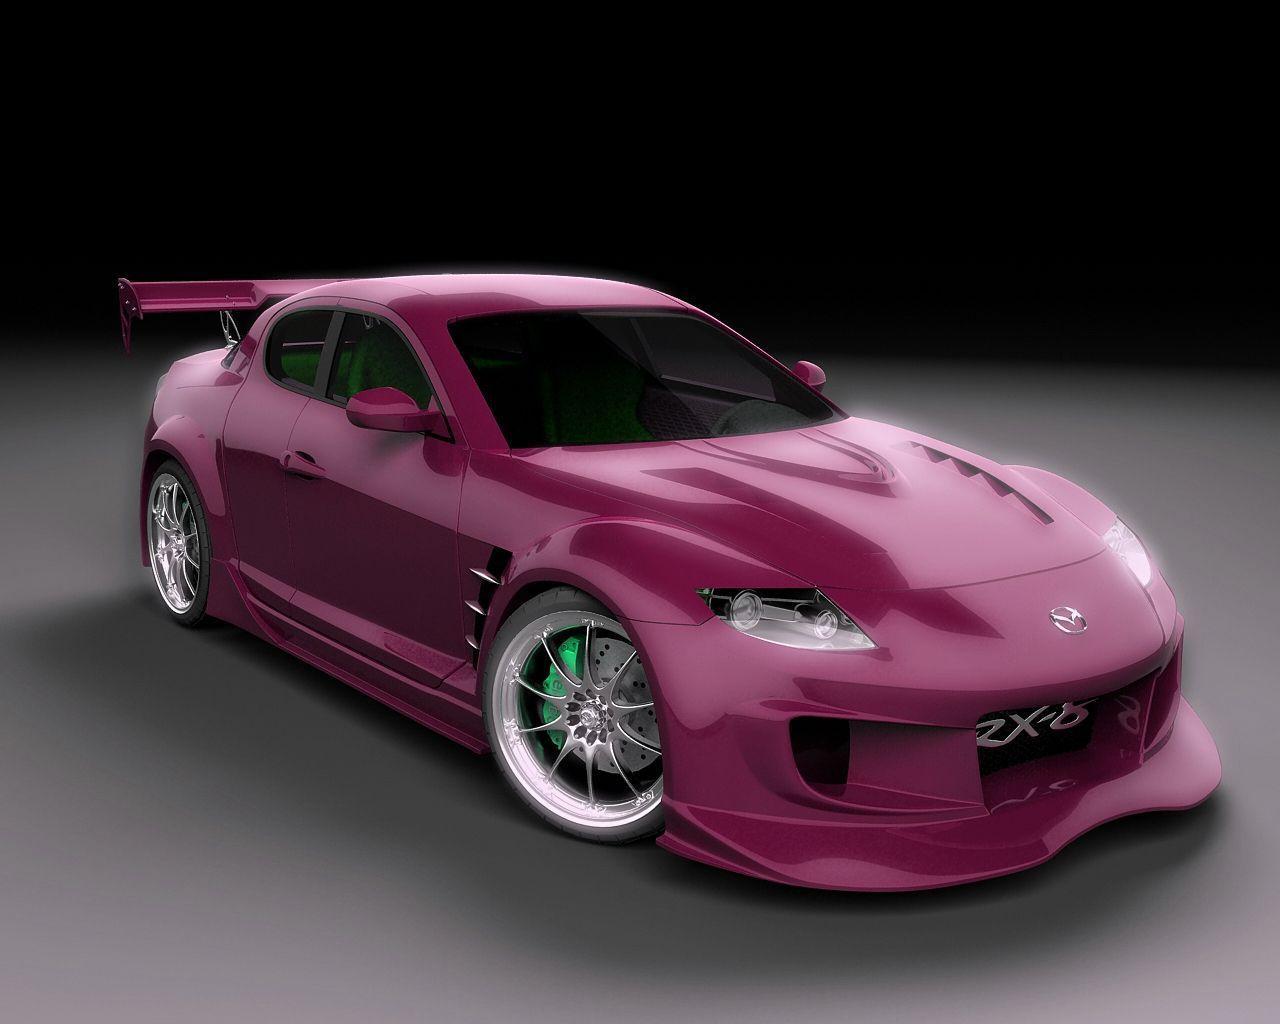 Mazda Rx8 Wallpaper. New and Used Cars Online Wallpaper. New